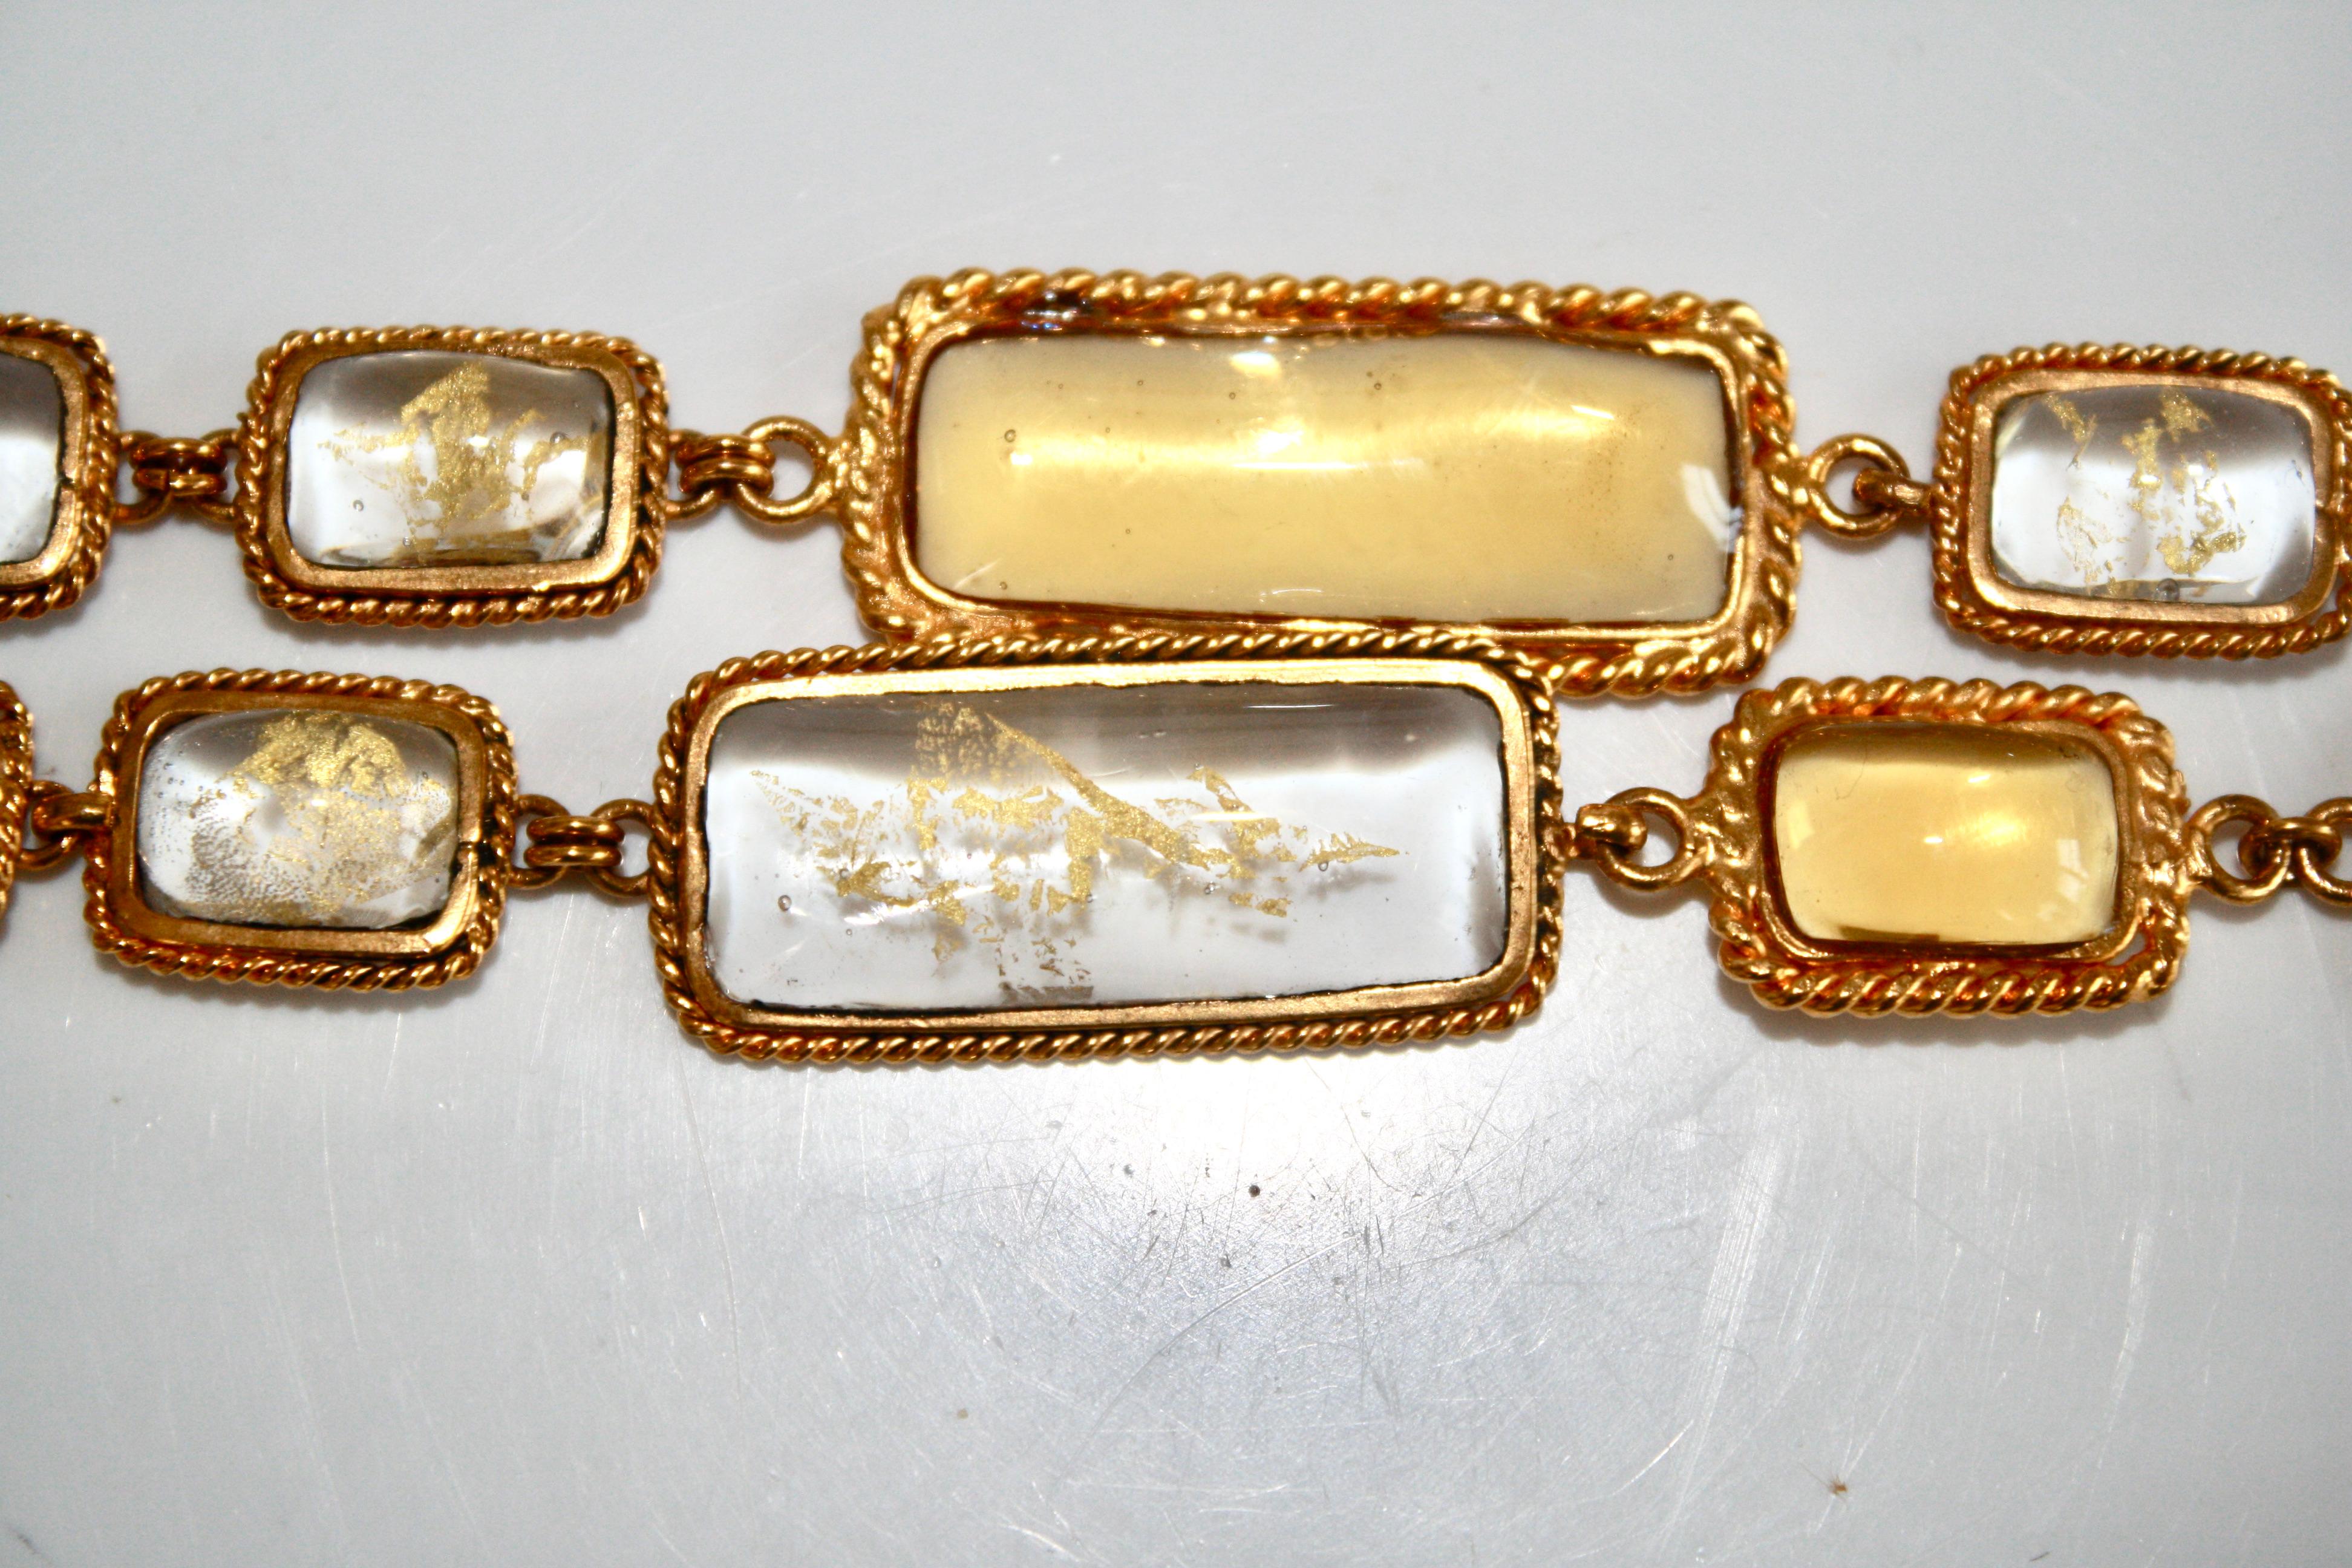 Poured glass or Pate de verre process bracelet in shades of pale gold and honey with gold leaf inlaid in clear glass.. made exclusively for Isabelle K.
Made by the former artisans of the atelier de Gripoix.
